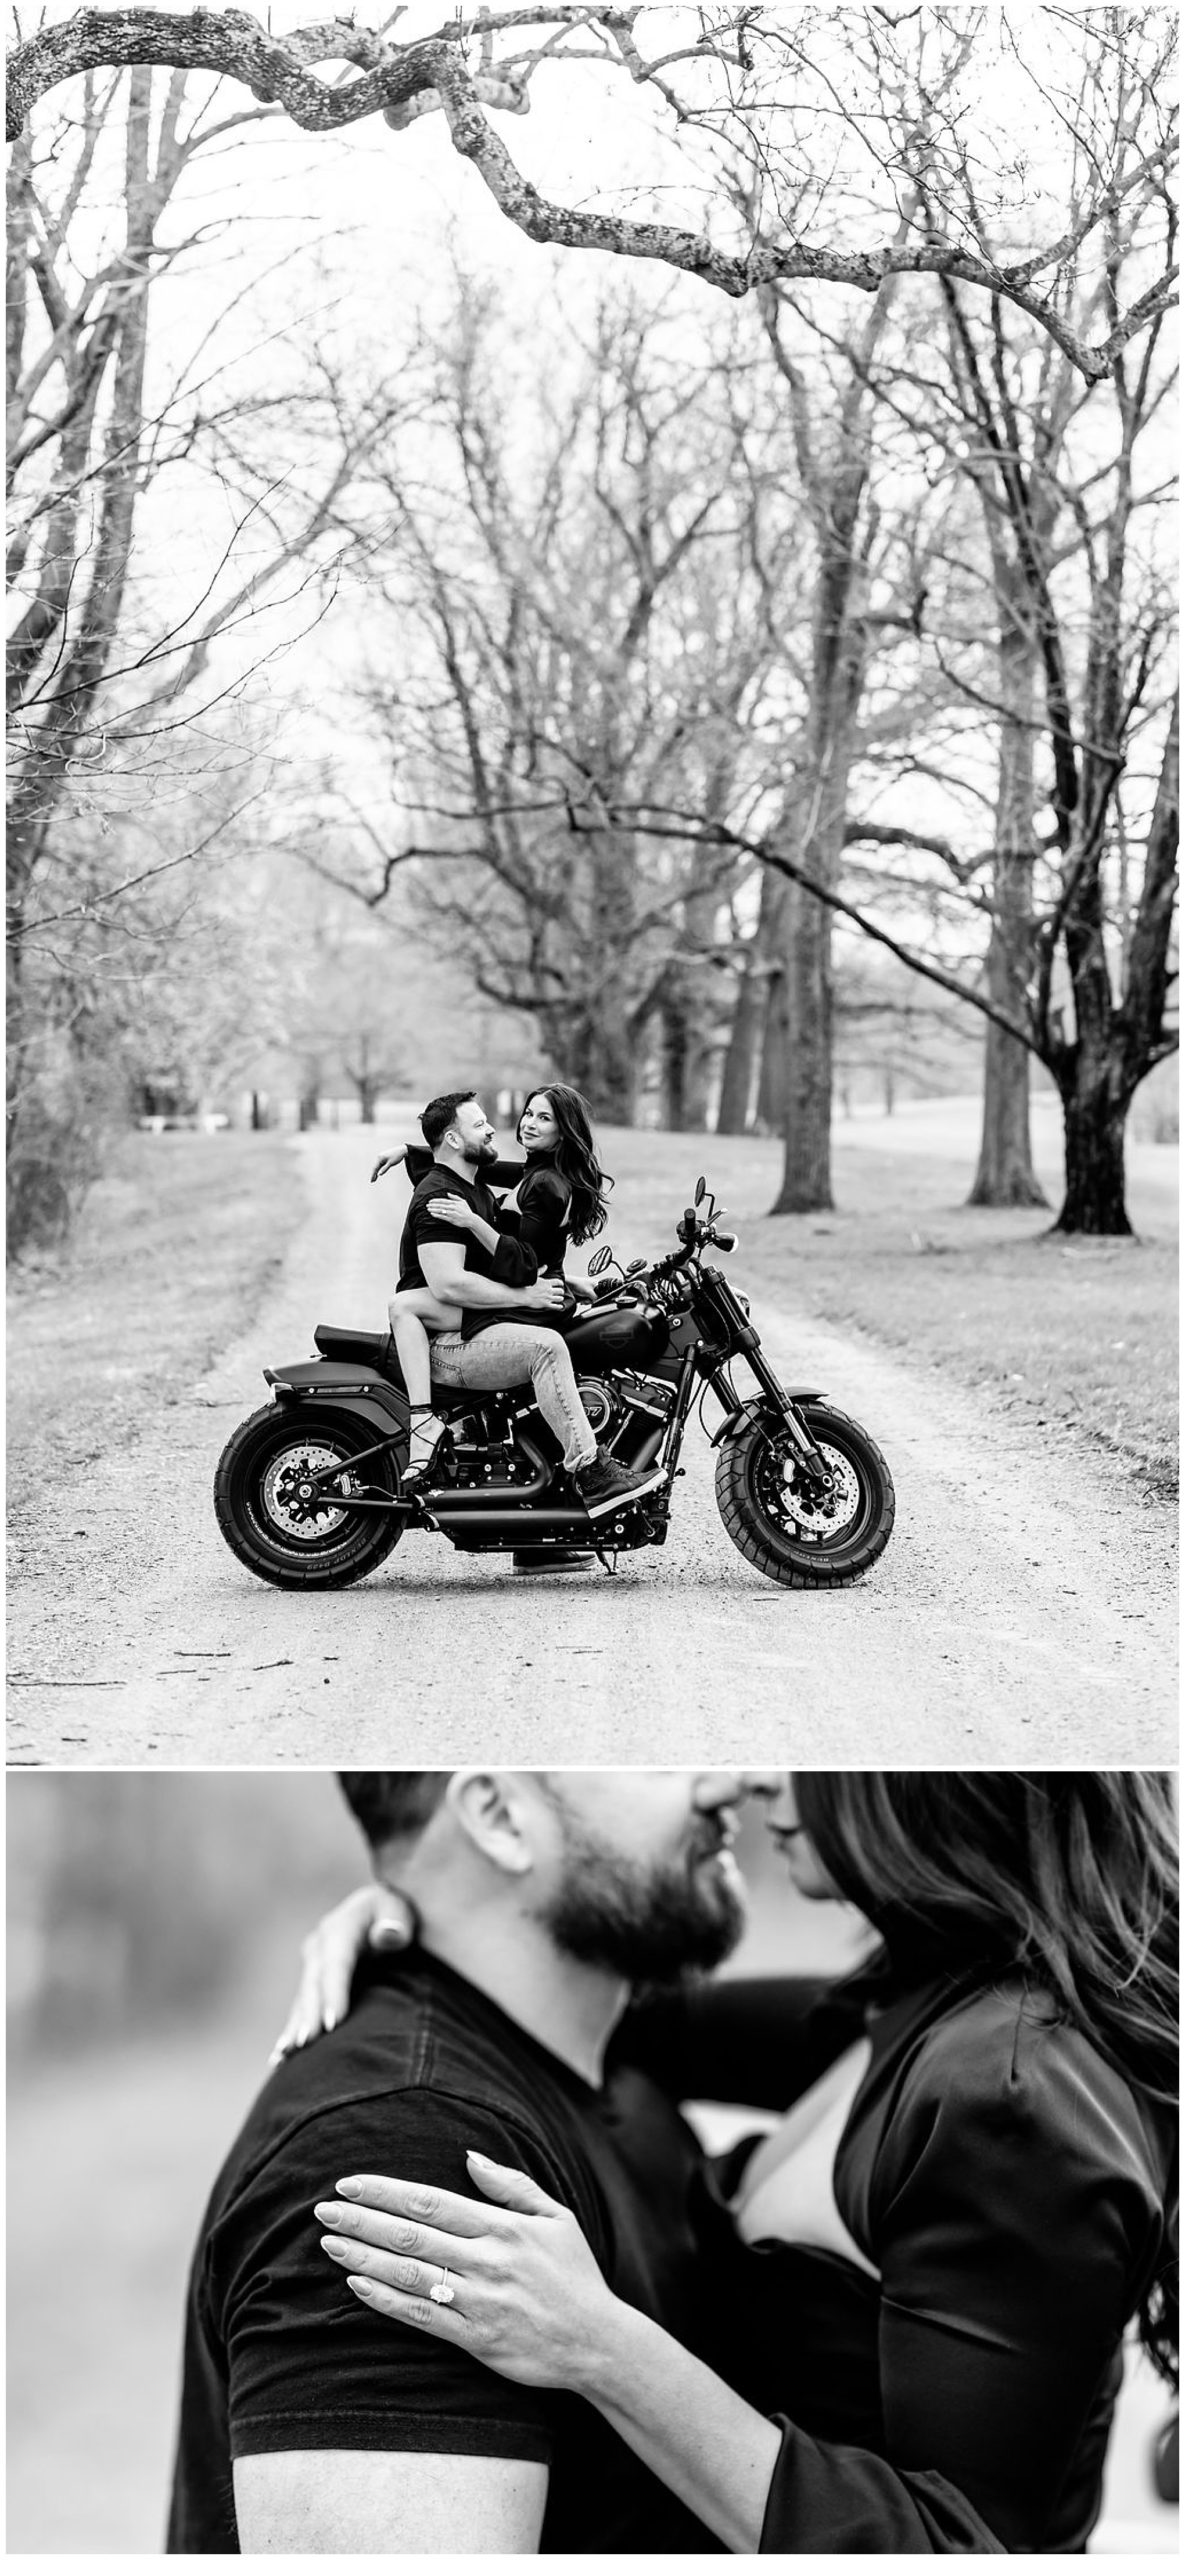 Oatlands Leesburg engagement photos, Leesburg wedding photographer, Leesburg photographer, Otlands engagement photos, DC engagement photographer, DC wedding photographer, spring engagement photos, sexy engagement photos, Rachel E.H. Photography, black and white, couple sitting on motorcycle, silver engagement ring